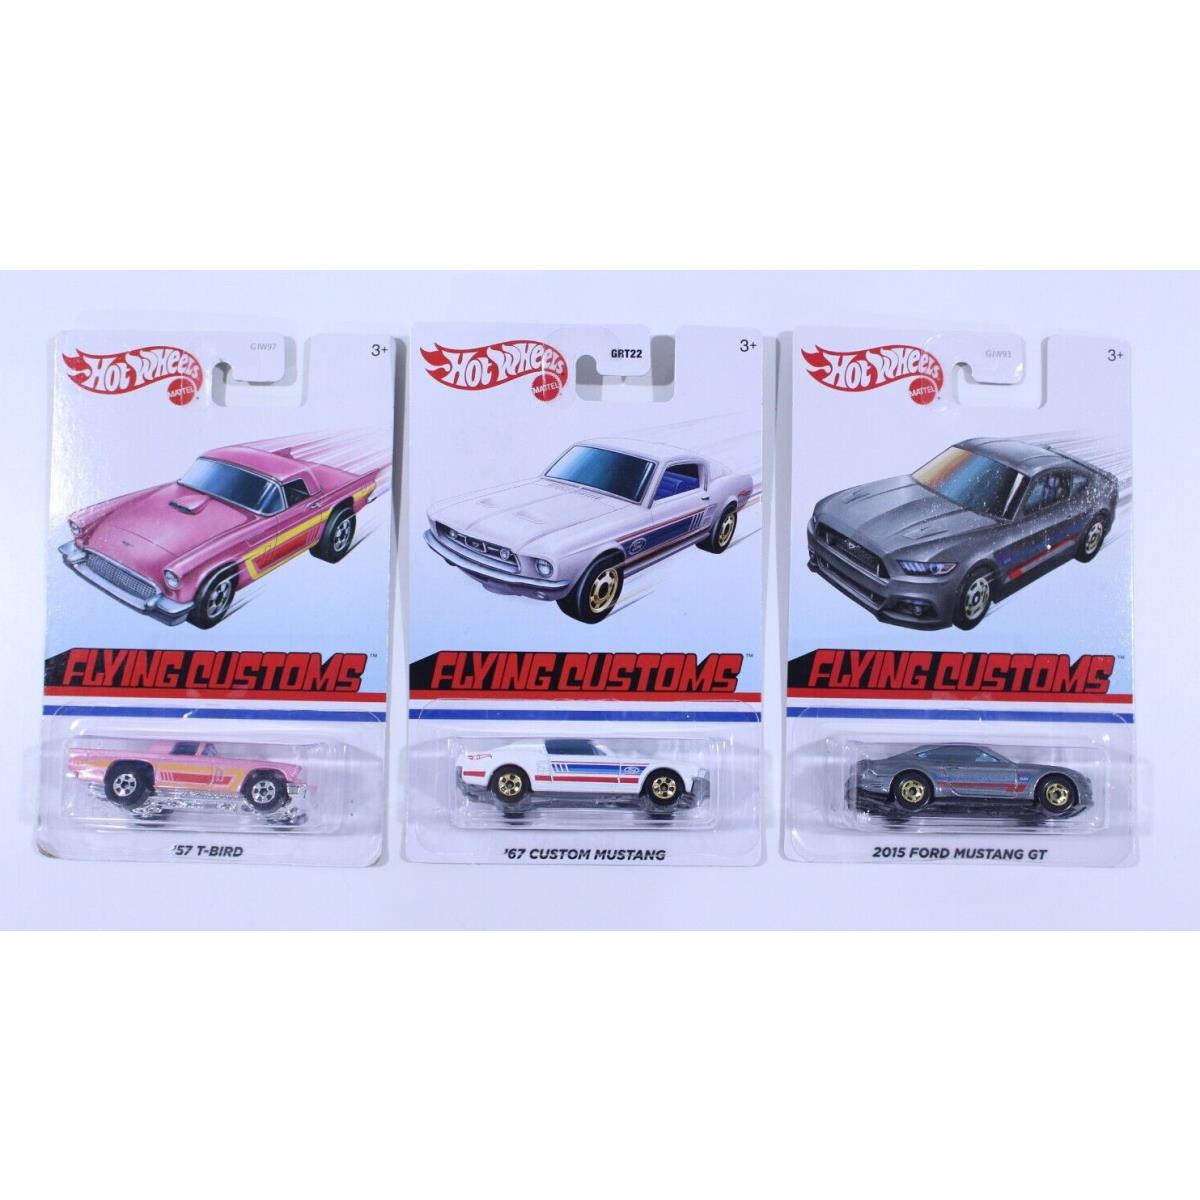 Hot Wheels Flying Customs 57 T-bird Pink 67 Mustang White 2015 GT Gray Ford